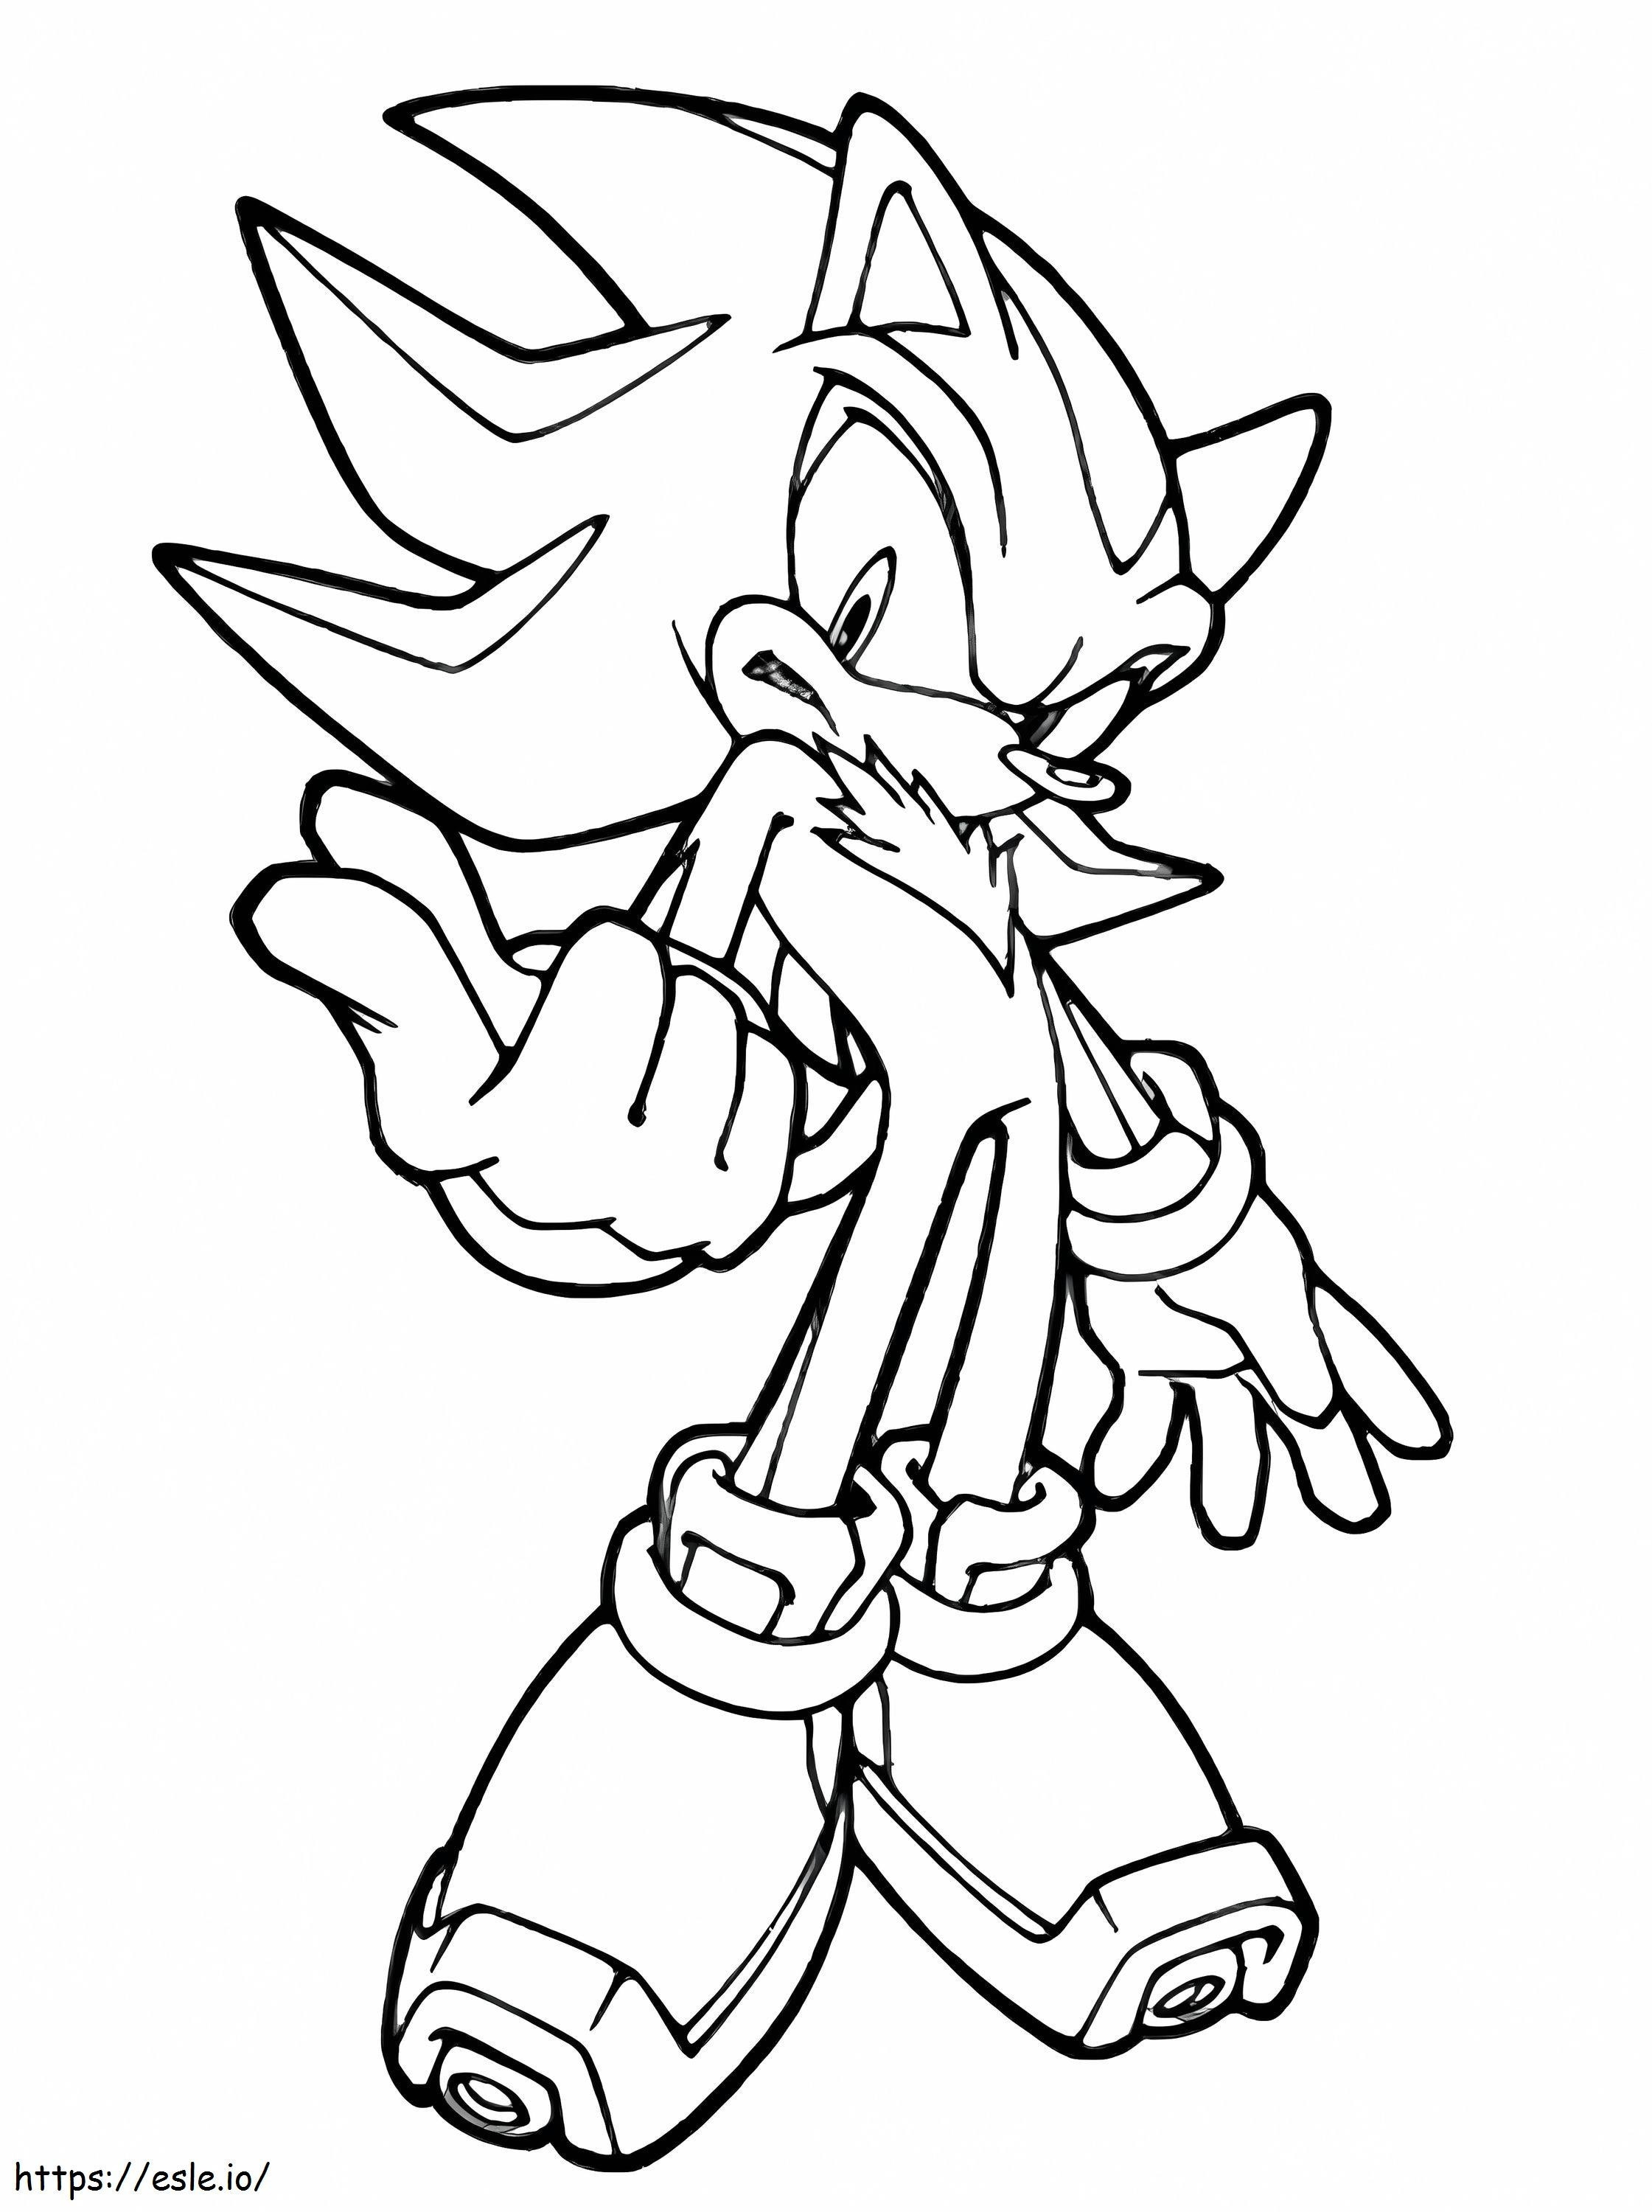 Sonic 3 coloring page